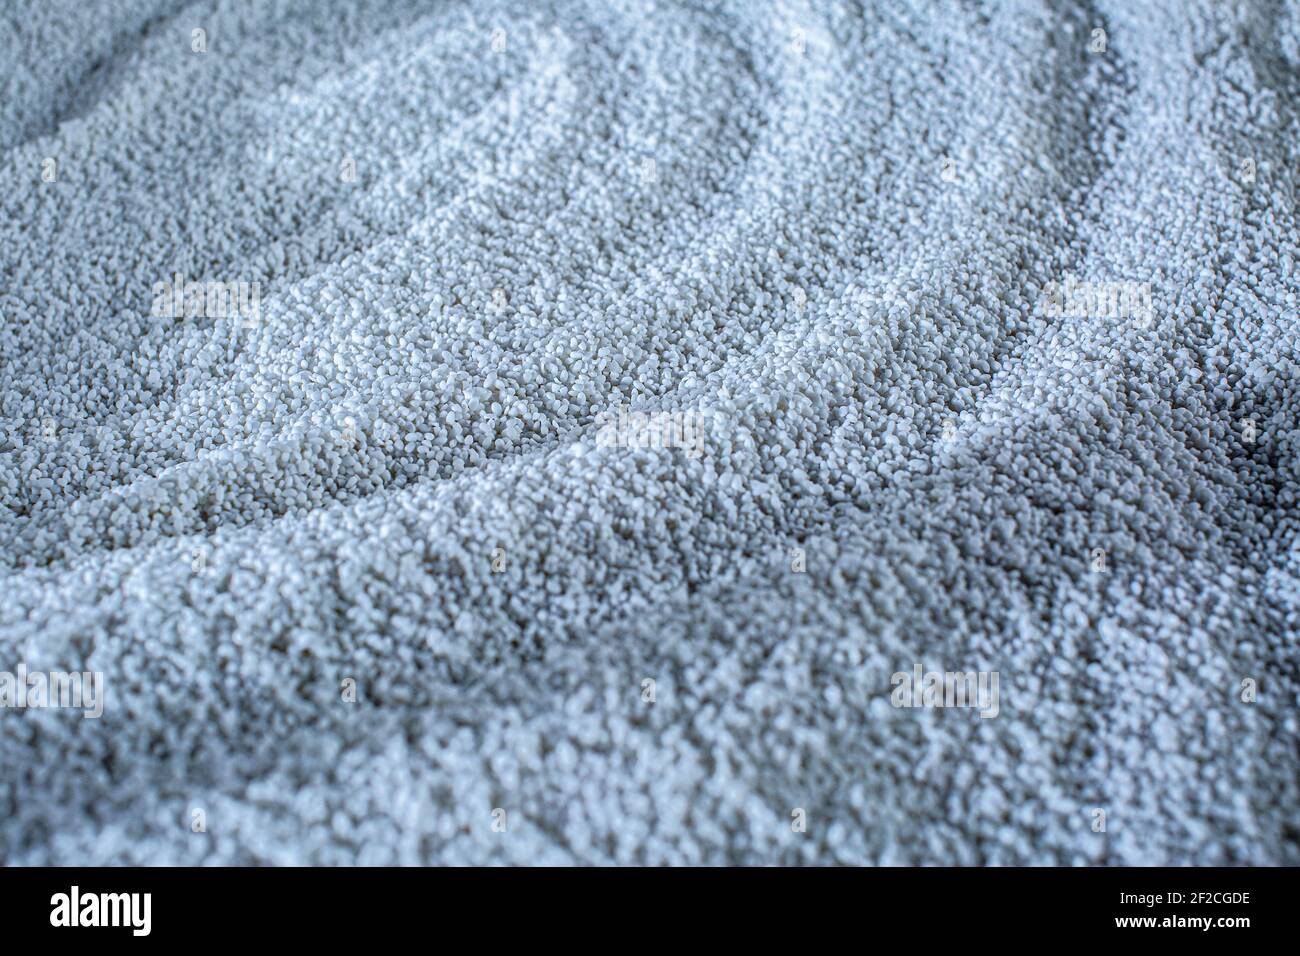 Producing Japanese sake/Finished koji rice drying and cooling Hyogo prefecture, Japan. Stock Photo